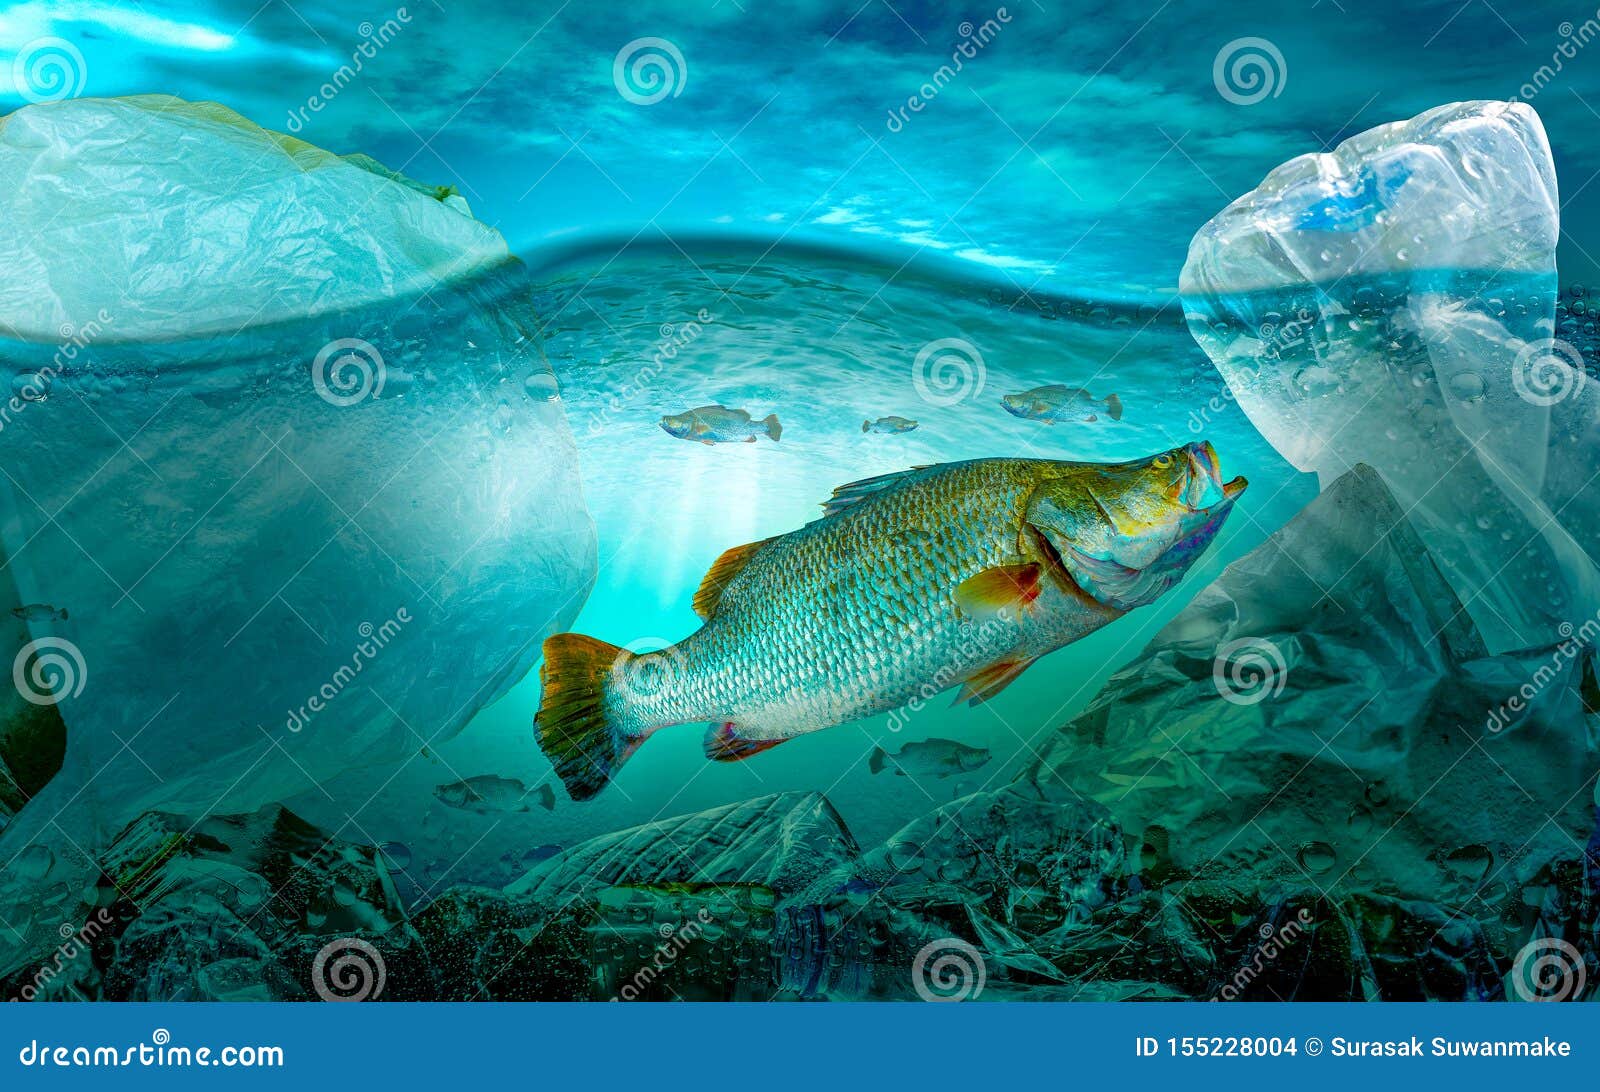 Plastic Pollution in Marine Environmental Problems Animals in the Sea  Cannot Live. and Cause Plastic Pollution in the Ocean Stock Photo - Image  of bottle, damage: 155228004